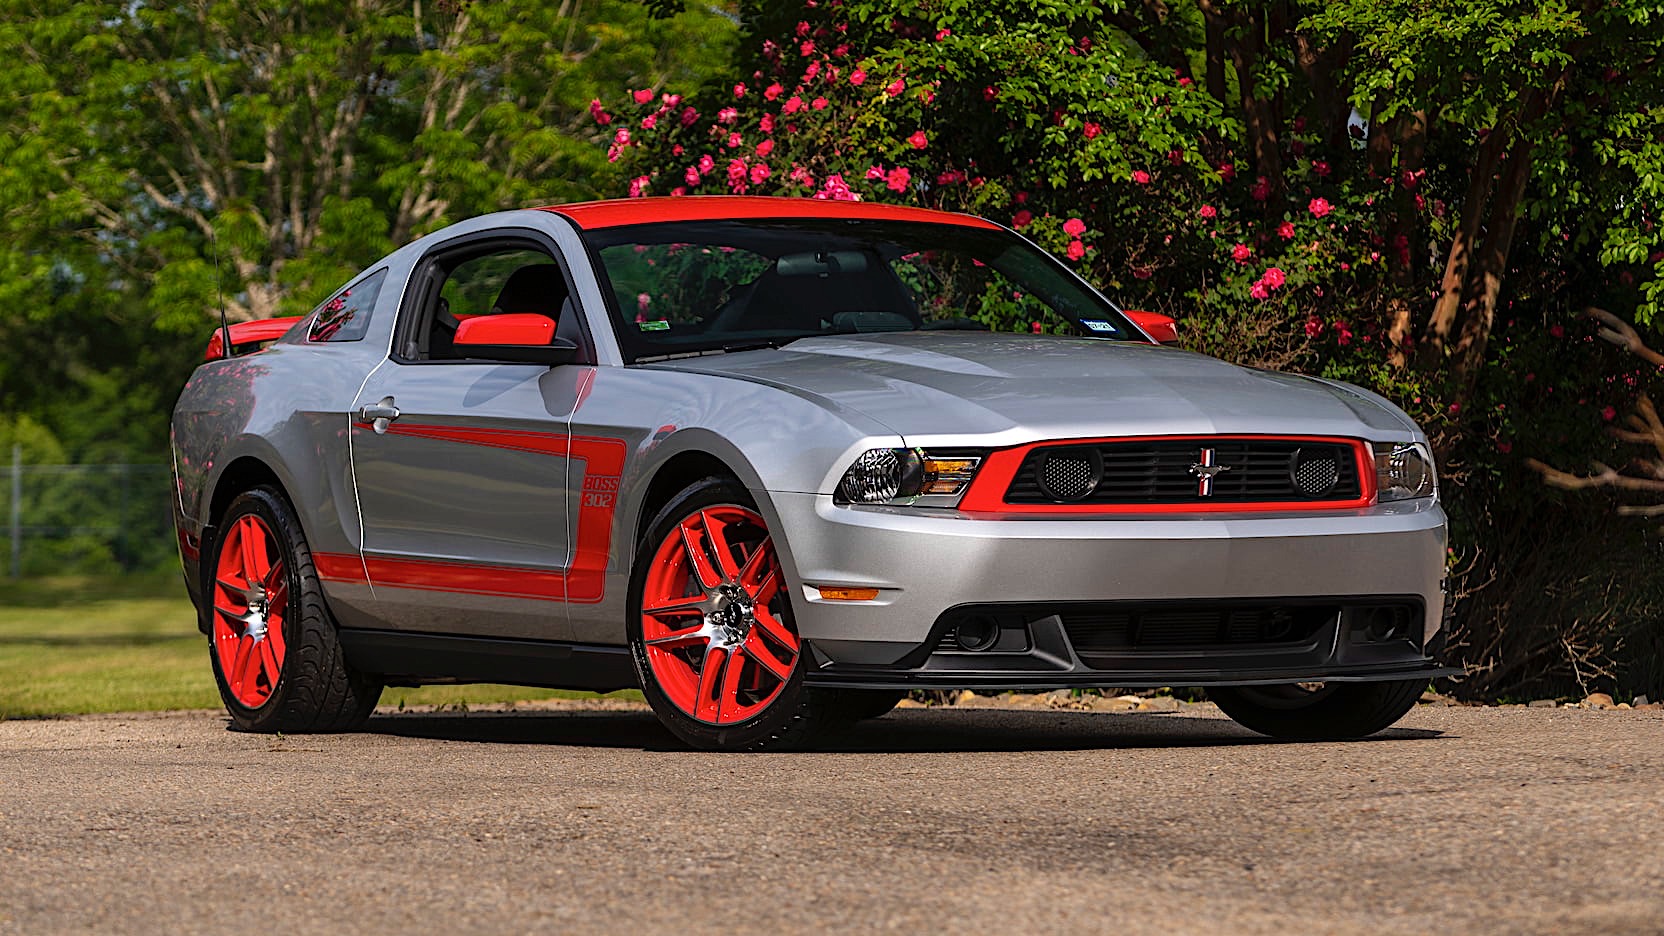 2012 Ford Mustang Boss 302 Laguna Seca Is All Sorts Of Special